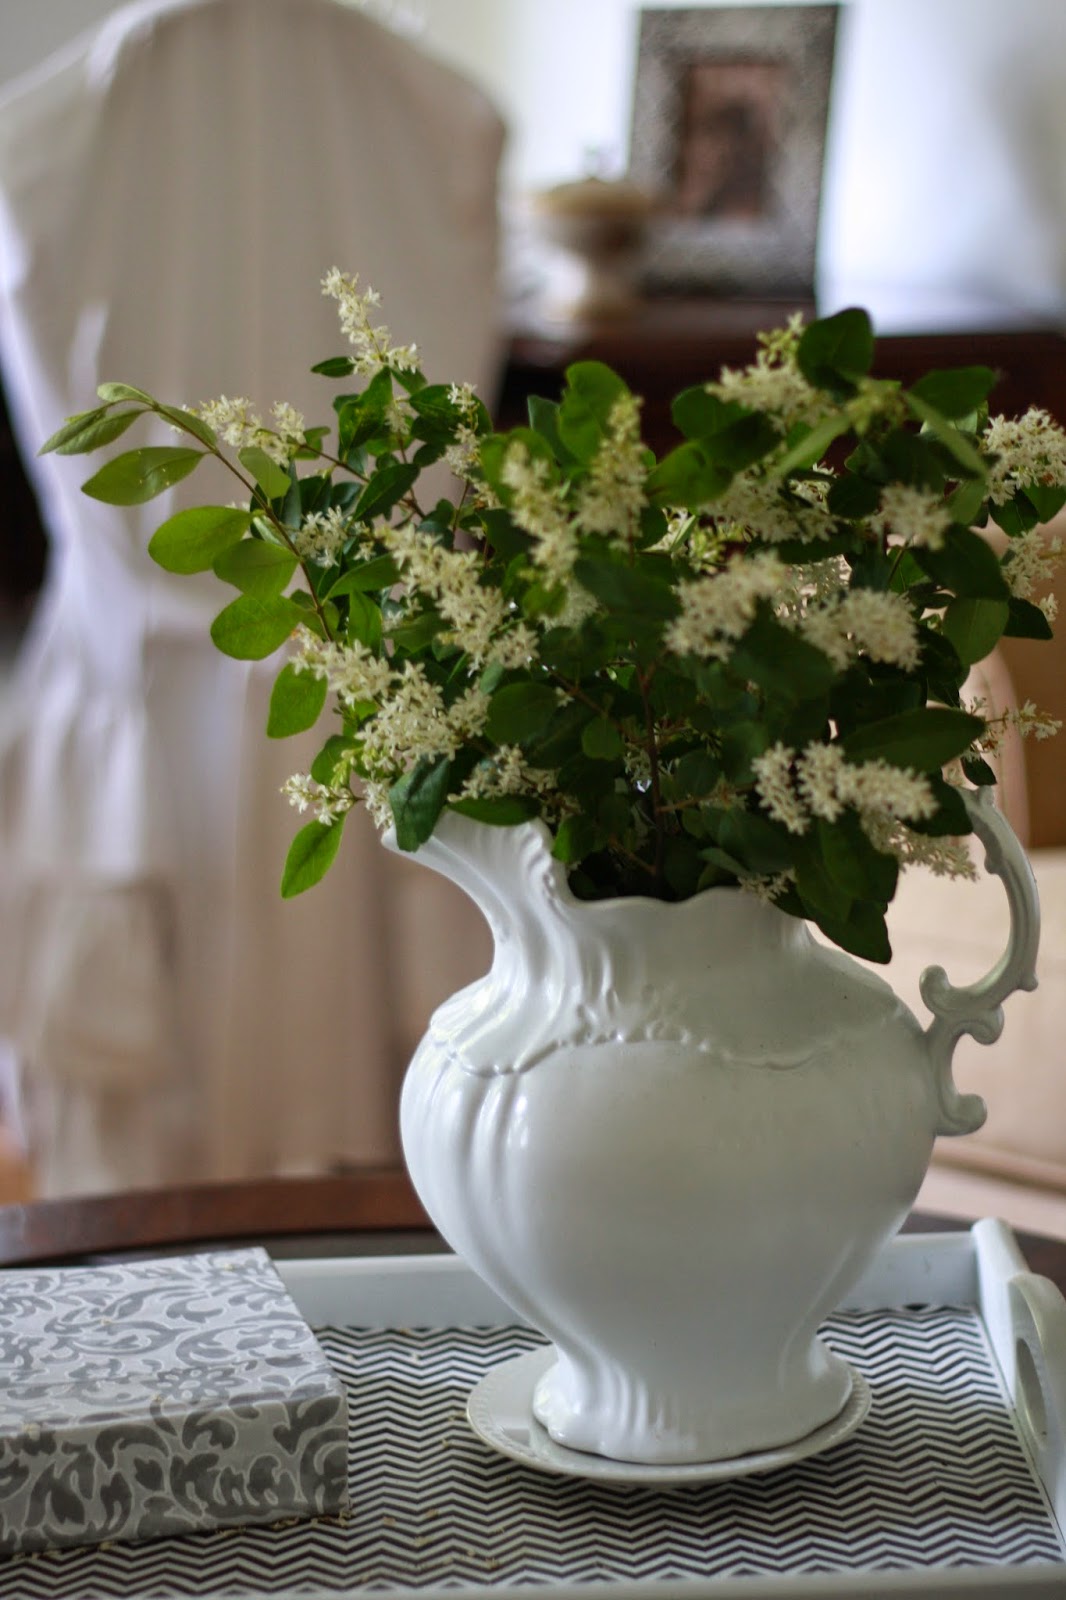 The little white cottage in the woods: The Privet flower...